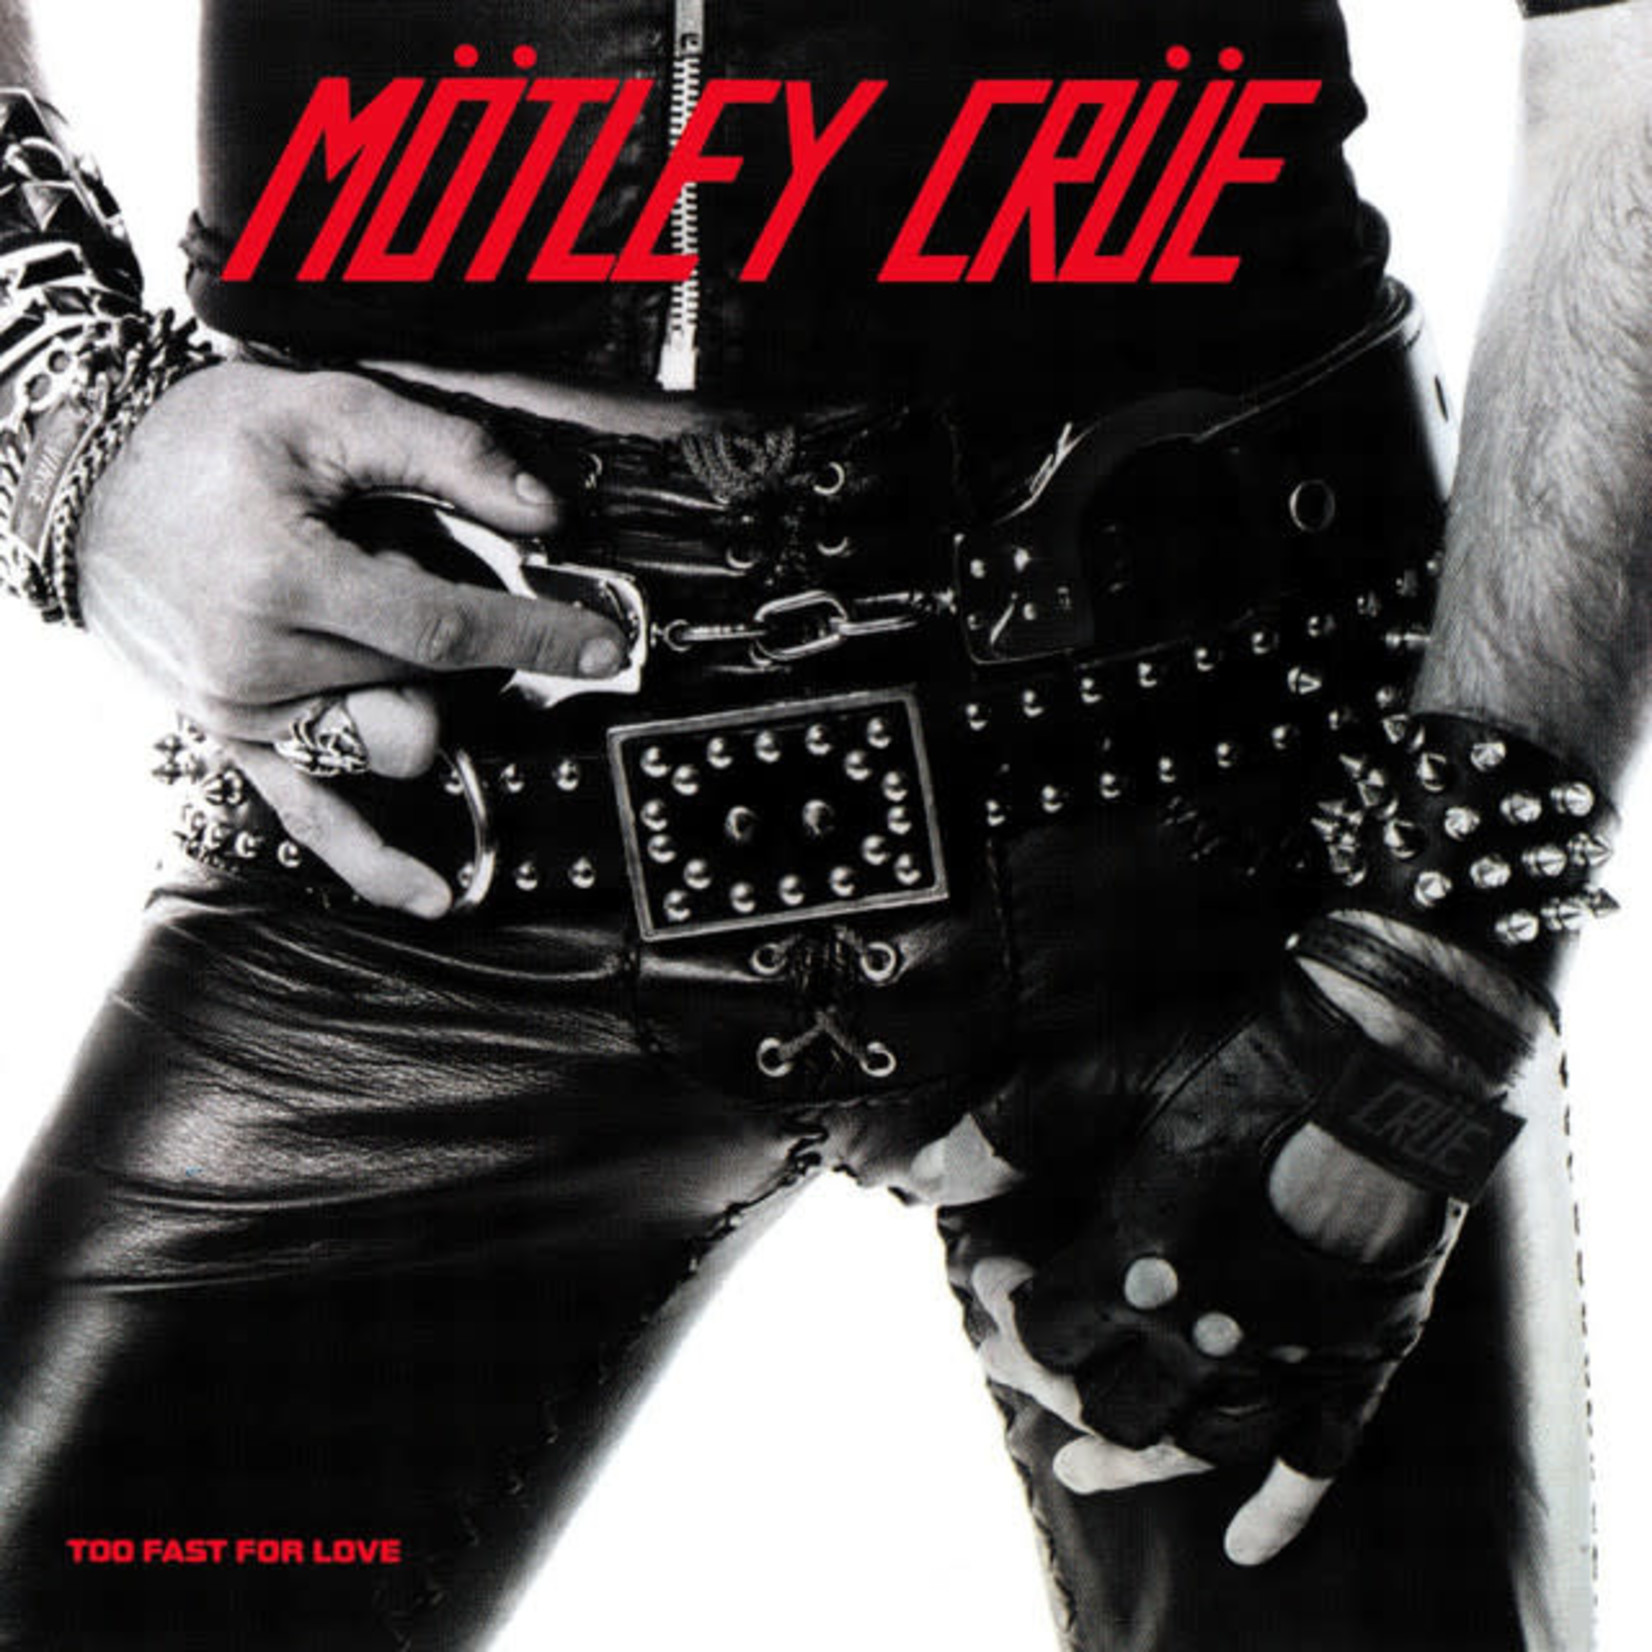 [New] Motley Crue - Too Fast For Love (2021 remaster)